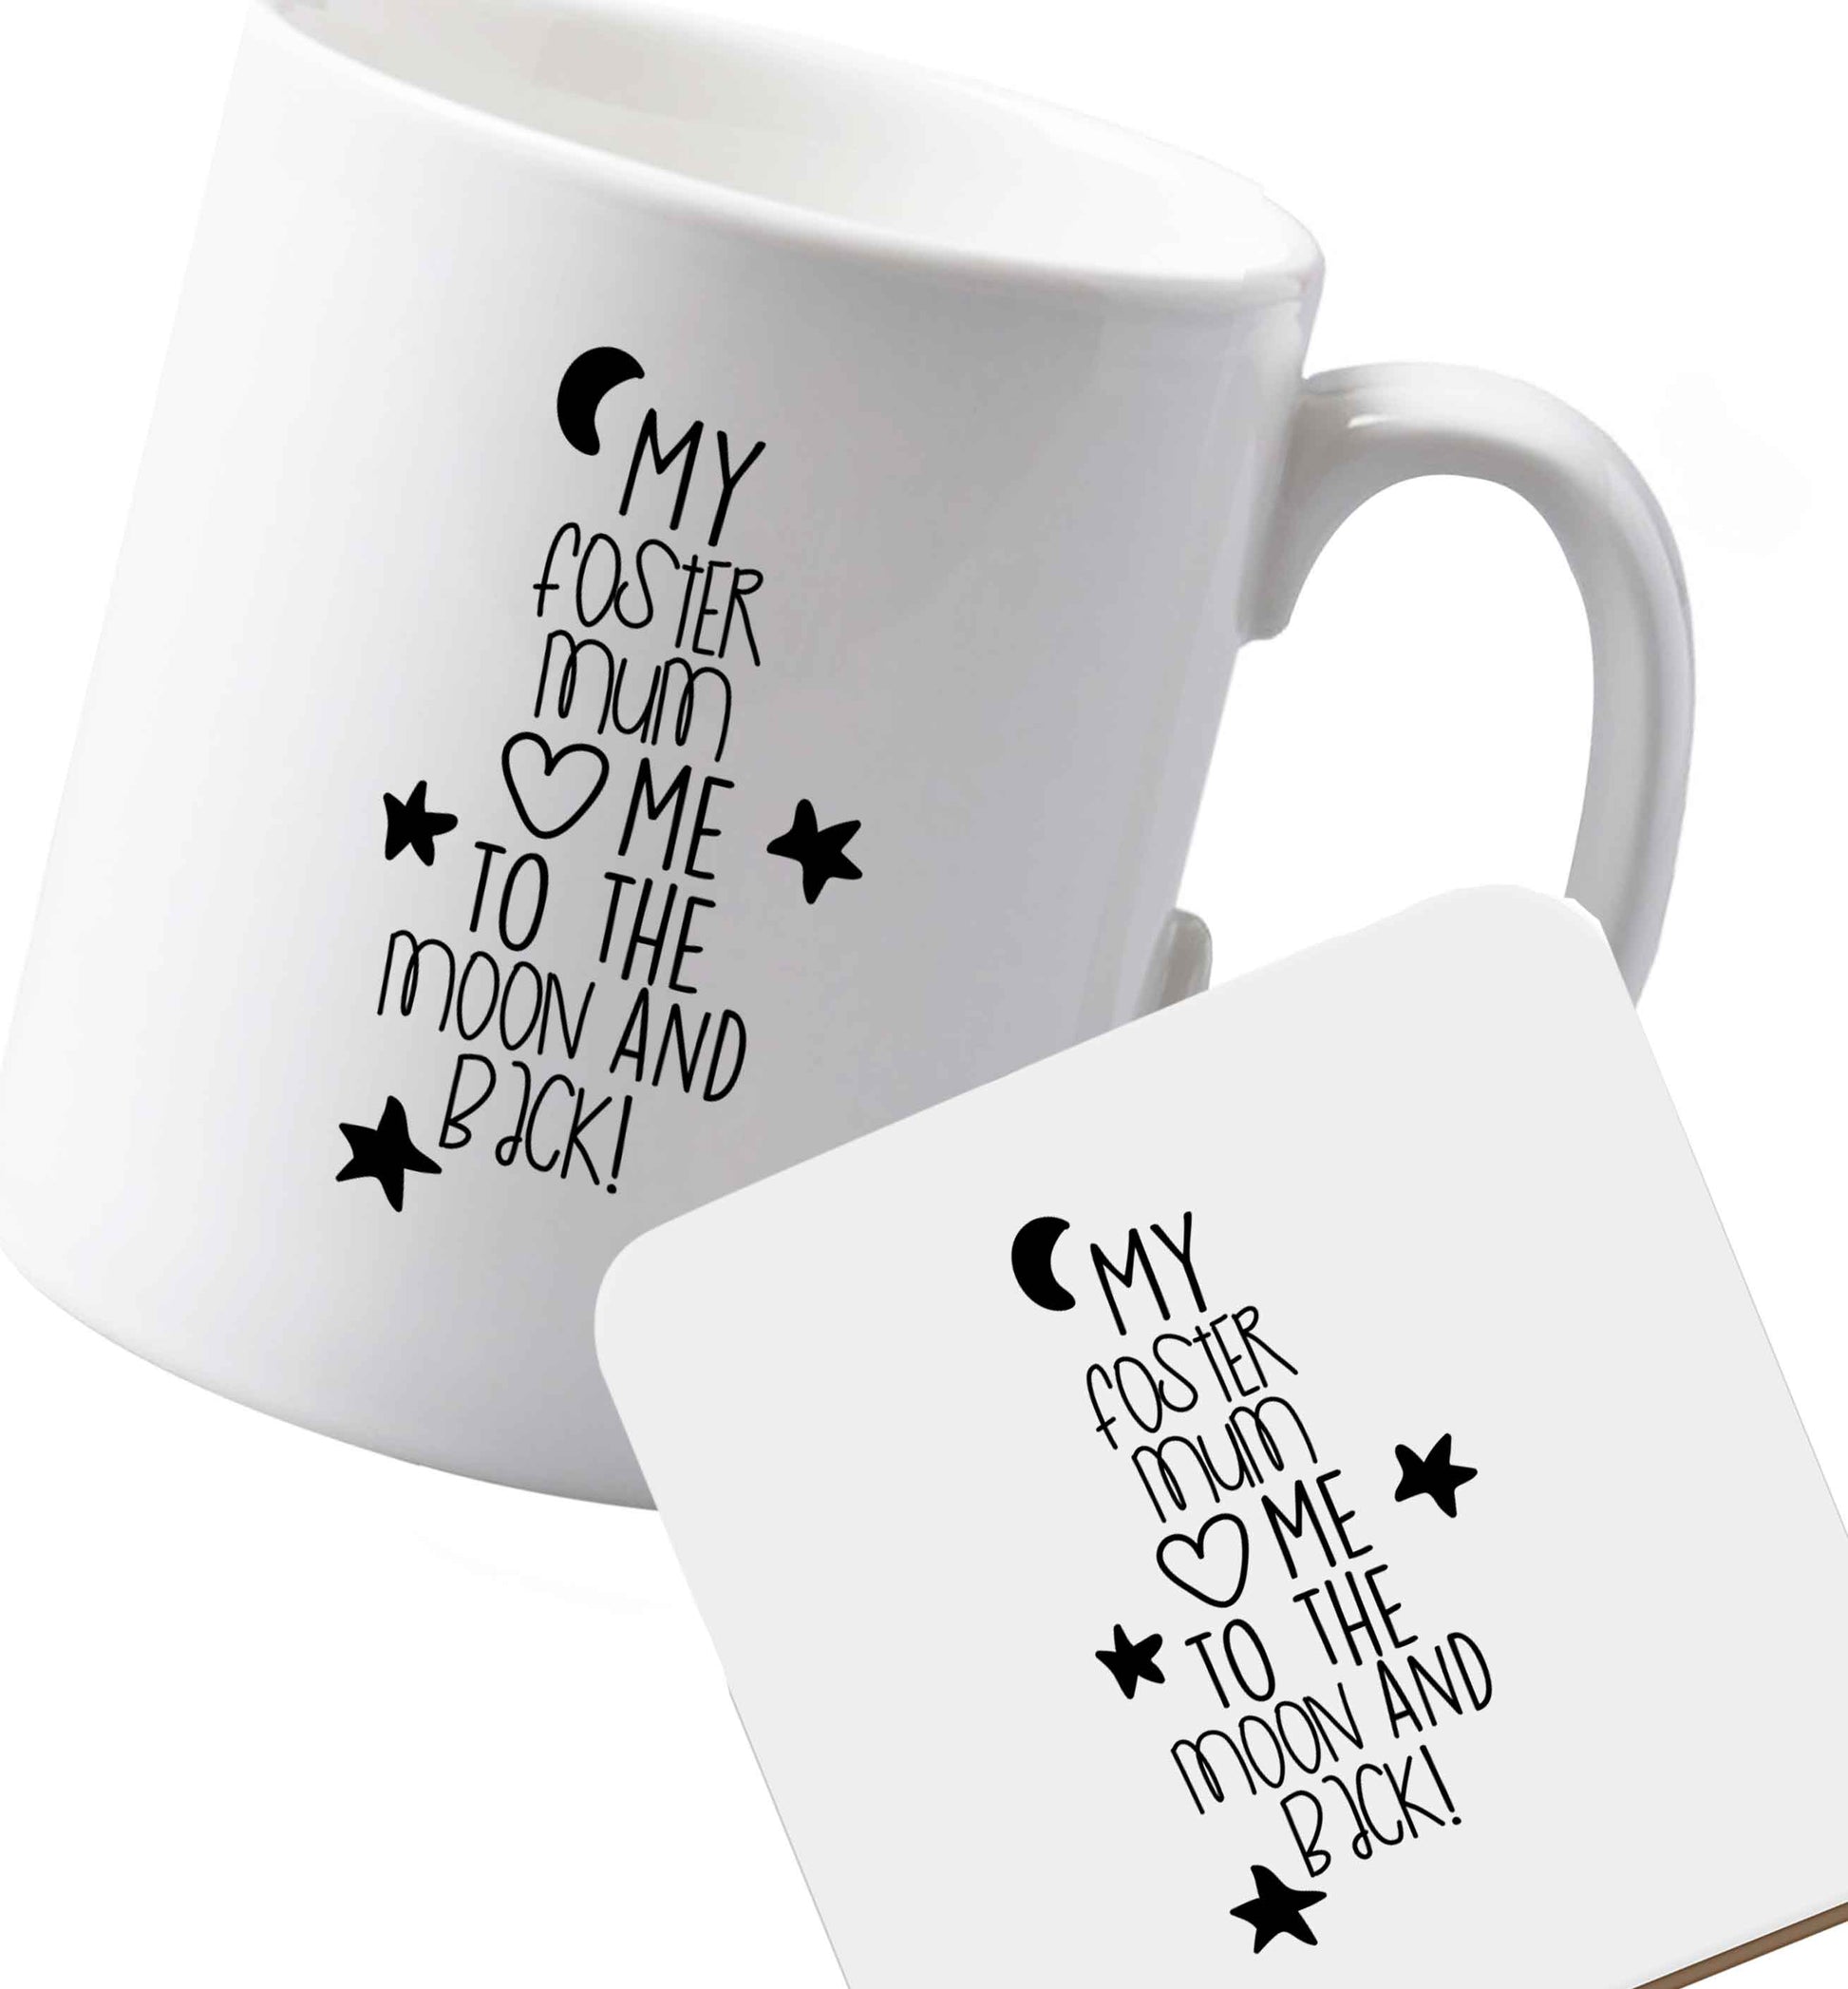 10 oz Ceramic mug and coaster My foster mum loves me to the moon and back both sides